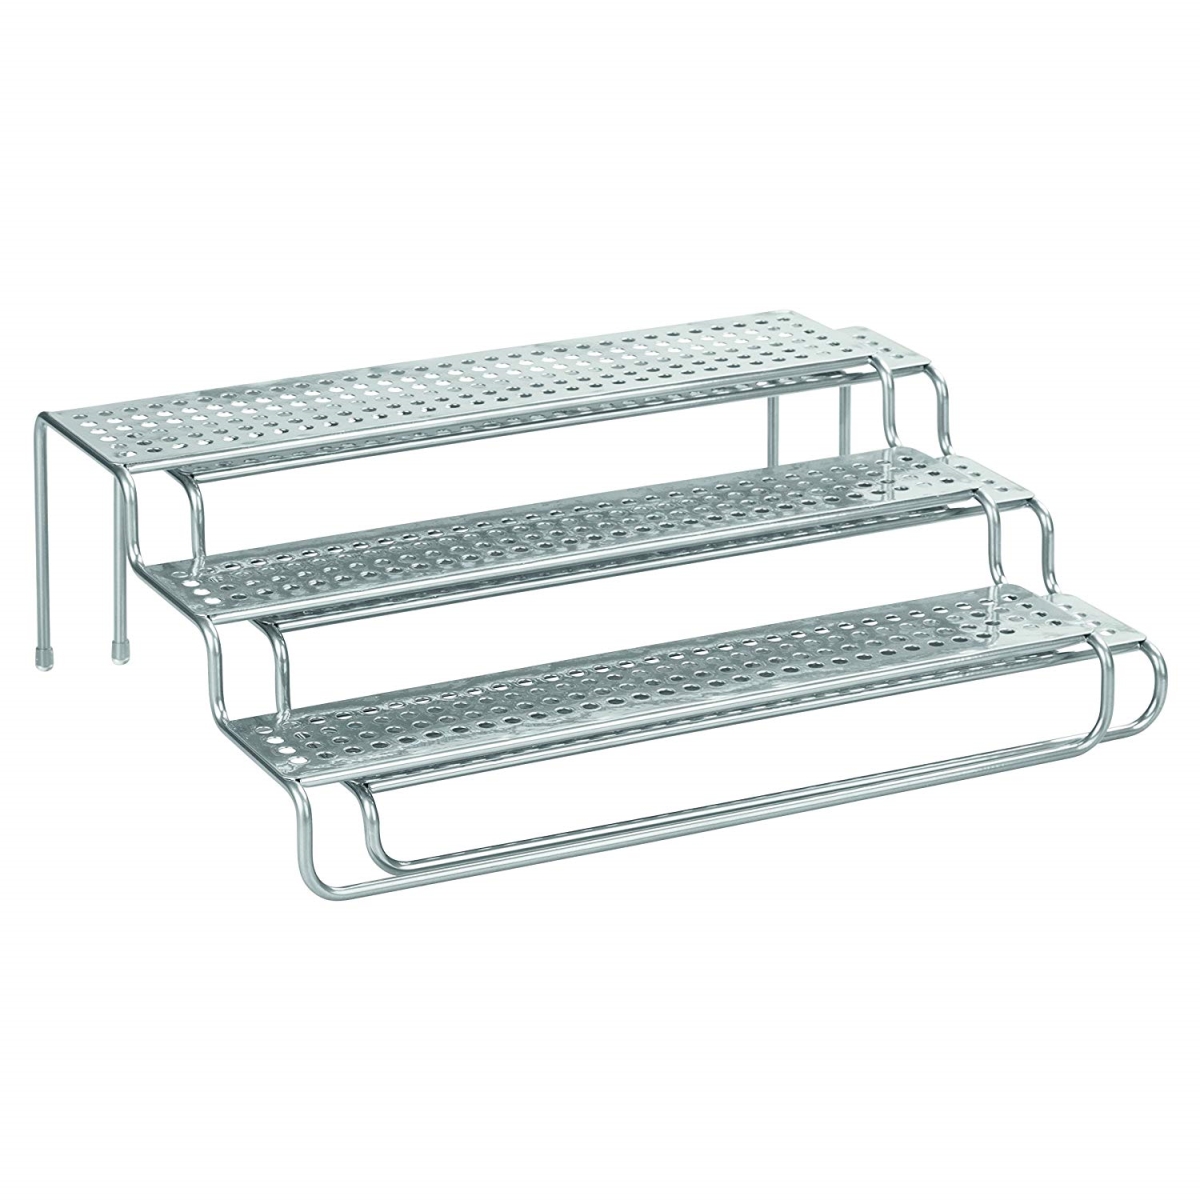 Picture of InterDesign 48876 Classico Expandable Spice Rack - Silver